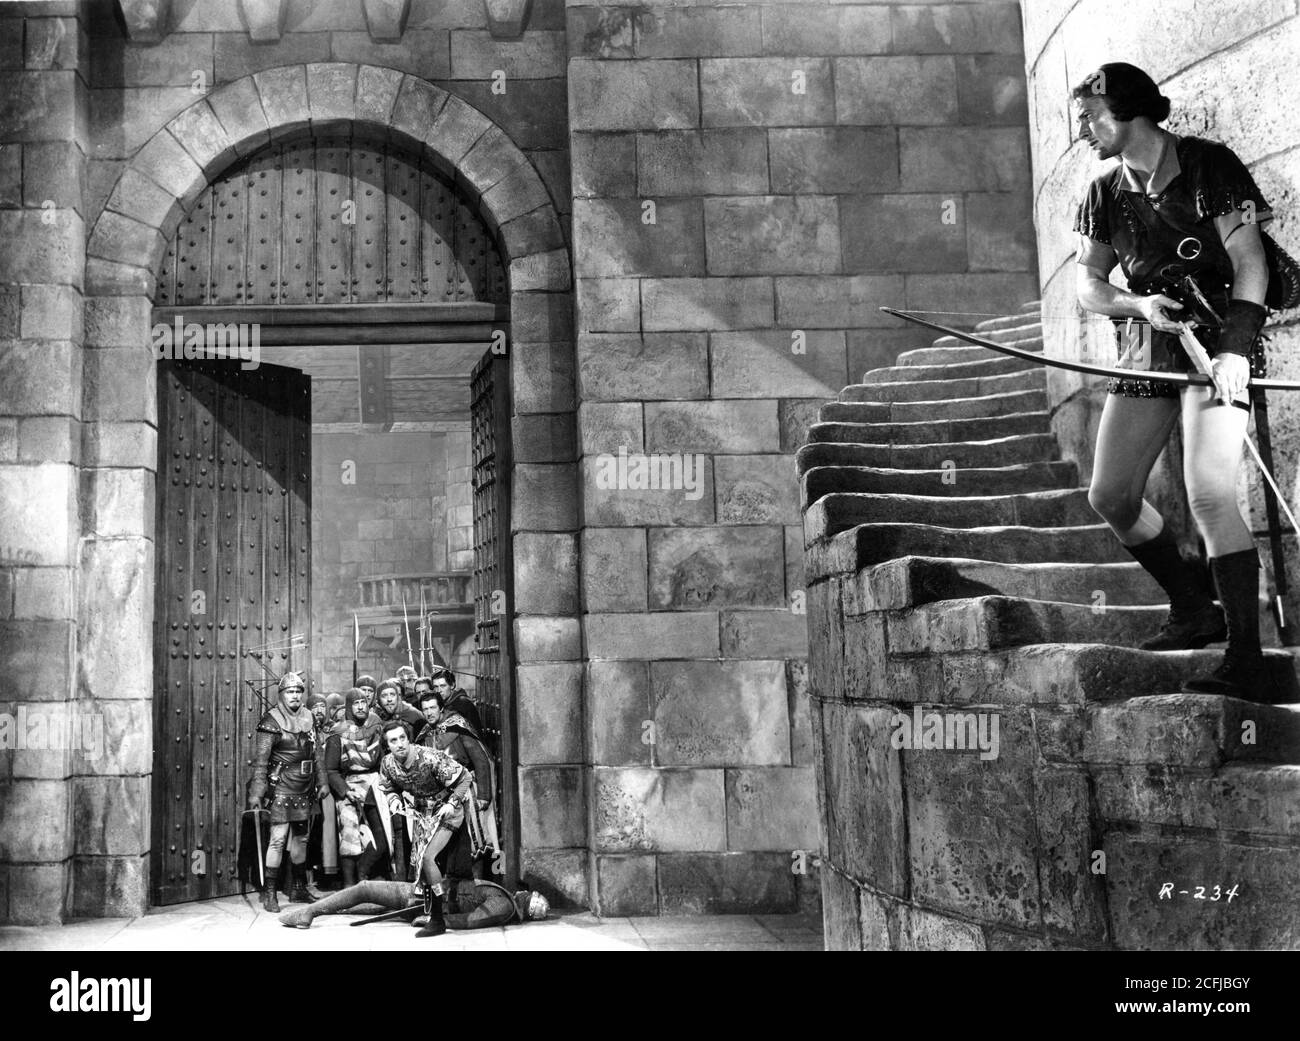 BASIL RATHBONE and ERROL FLYNN in THE ADVENTURES OF ROBIN HOOD 1938 directors MICHAEL CURTIZ and WILLIAM KEIGHLEY music Erich Wolfgang Korngold Warner Bros. Stock Photo